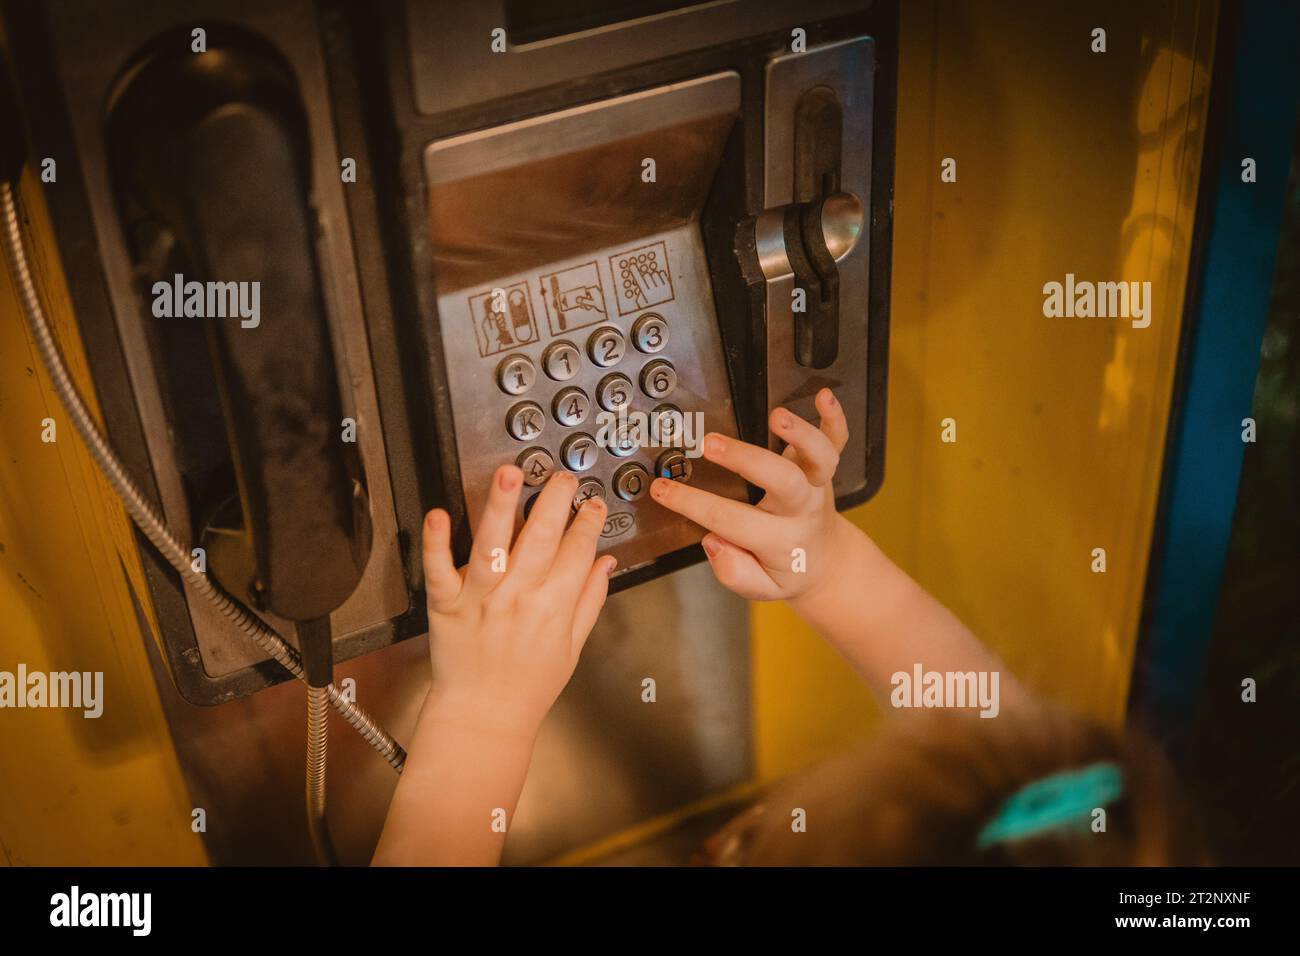 Little girl typing numbers on phone booth Stock Photo